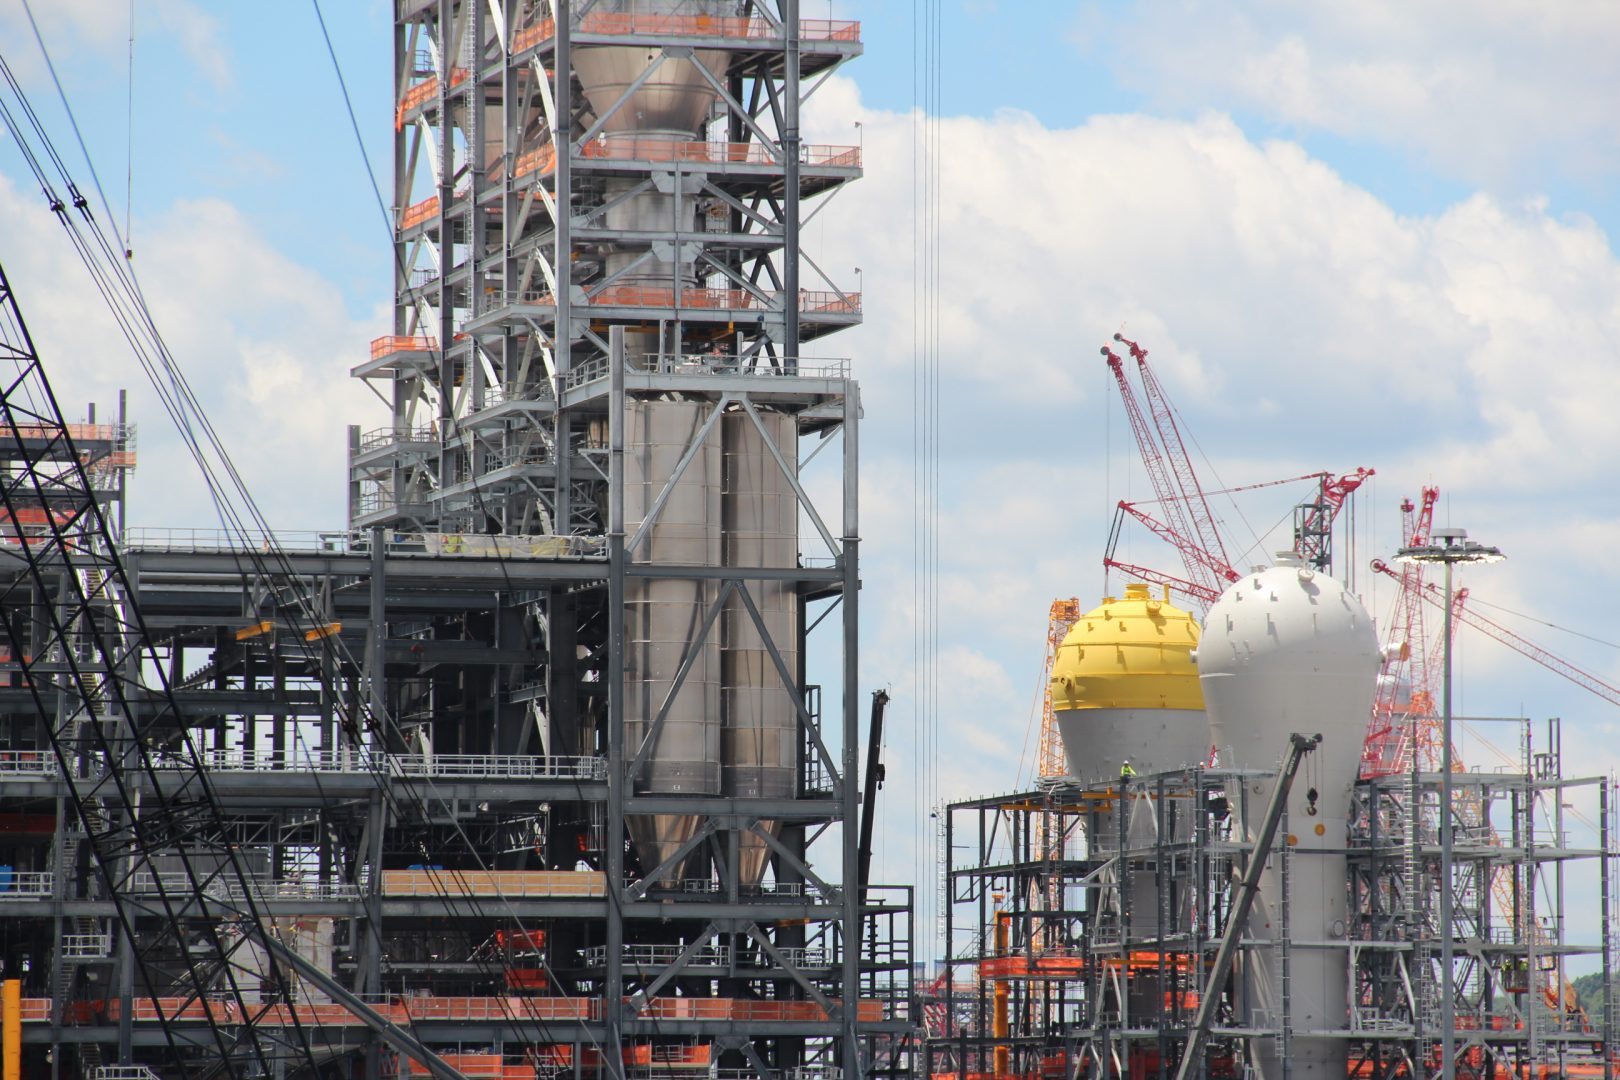 Shell's ethane cracker under construction in June, 2019 in Beaver County, Pa. A similar plant is proposed to be built in Belmont County, Ohio, roughly a 90-minute drive away. 